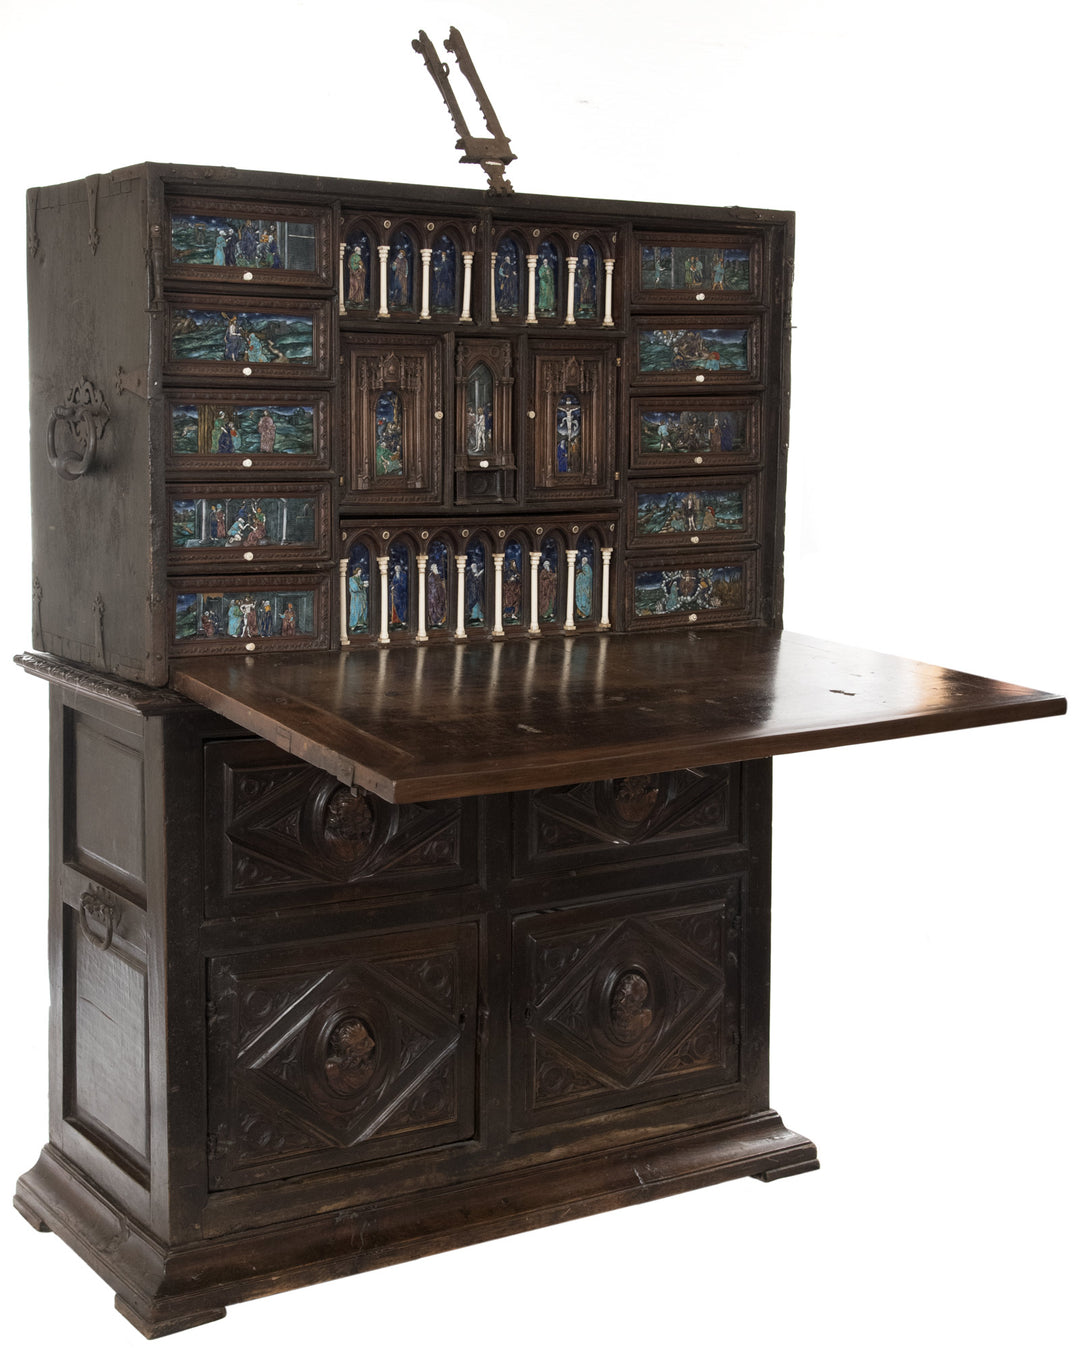 16th Century Spanish Vargueño Cabinet with Limoges Enamel Drawer Fronts